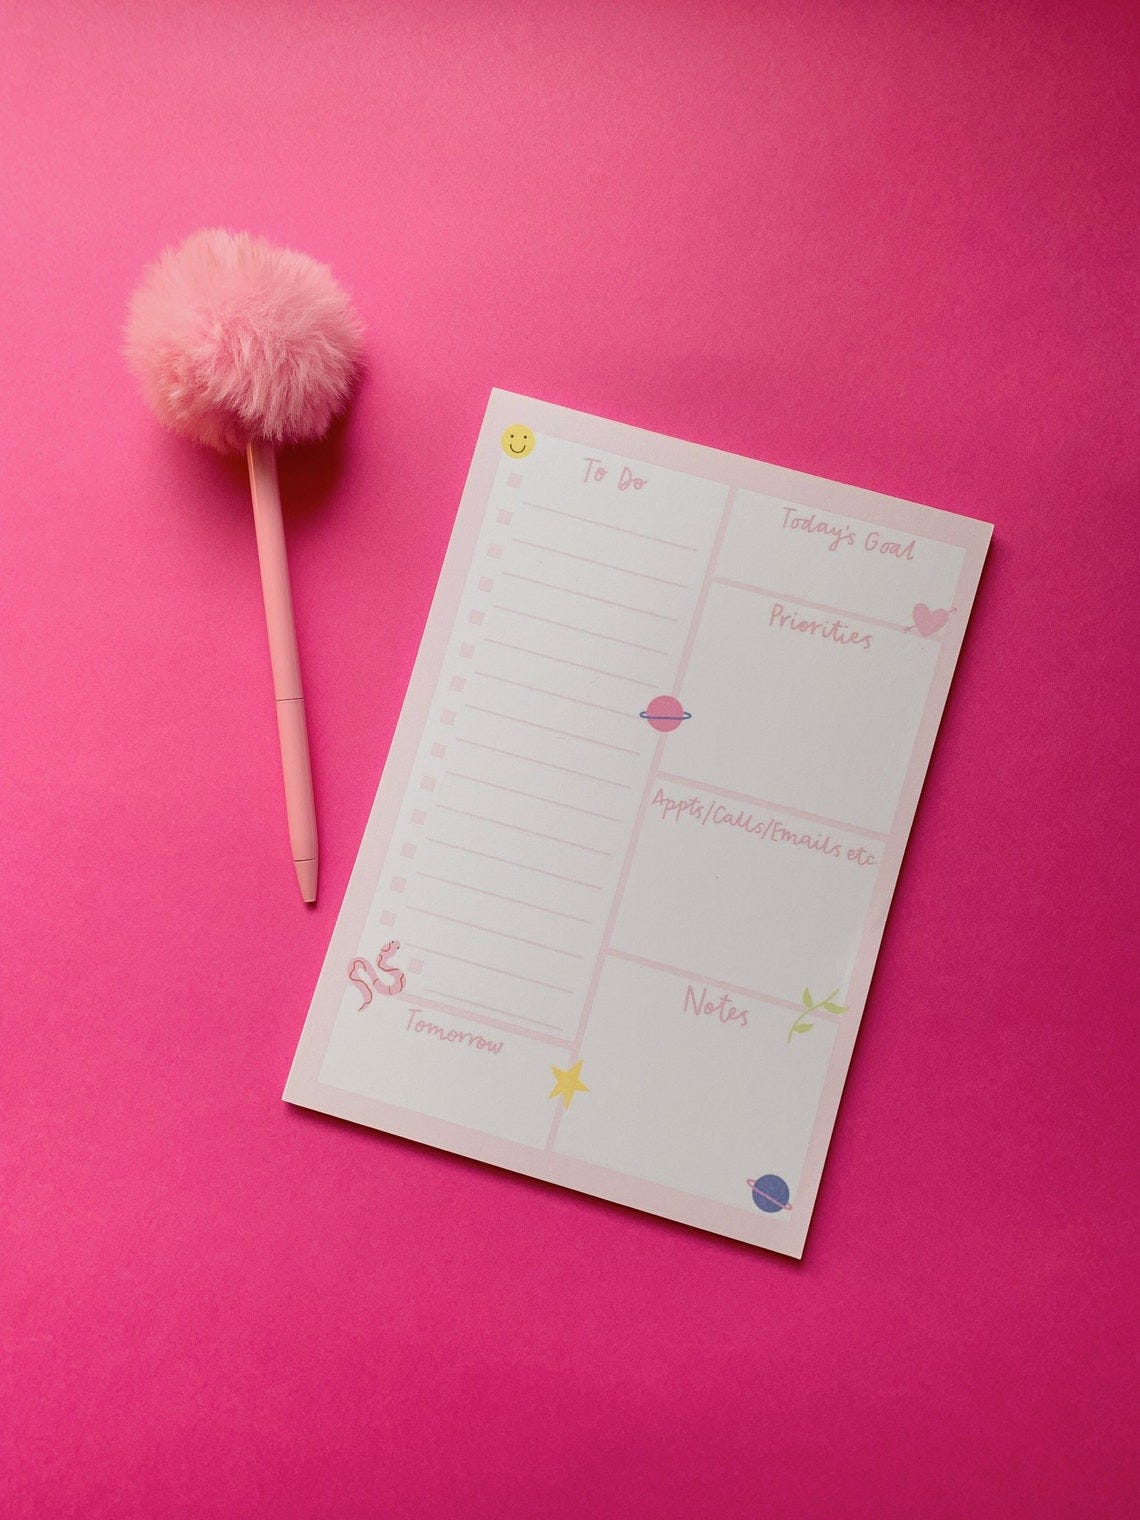 A5 Daily Planner Desk Pad / Cute / Pink / Organiser / To Do image 1